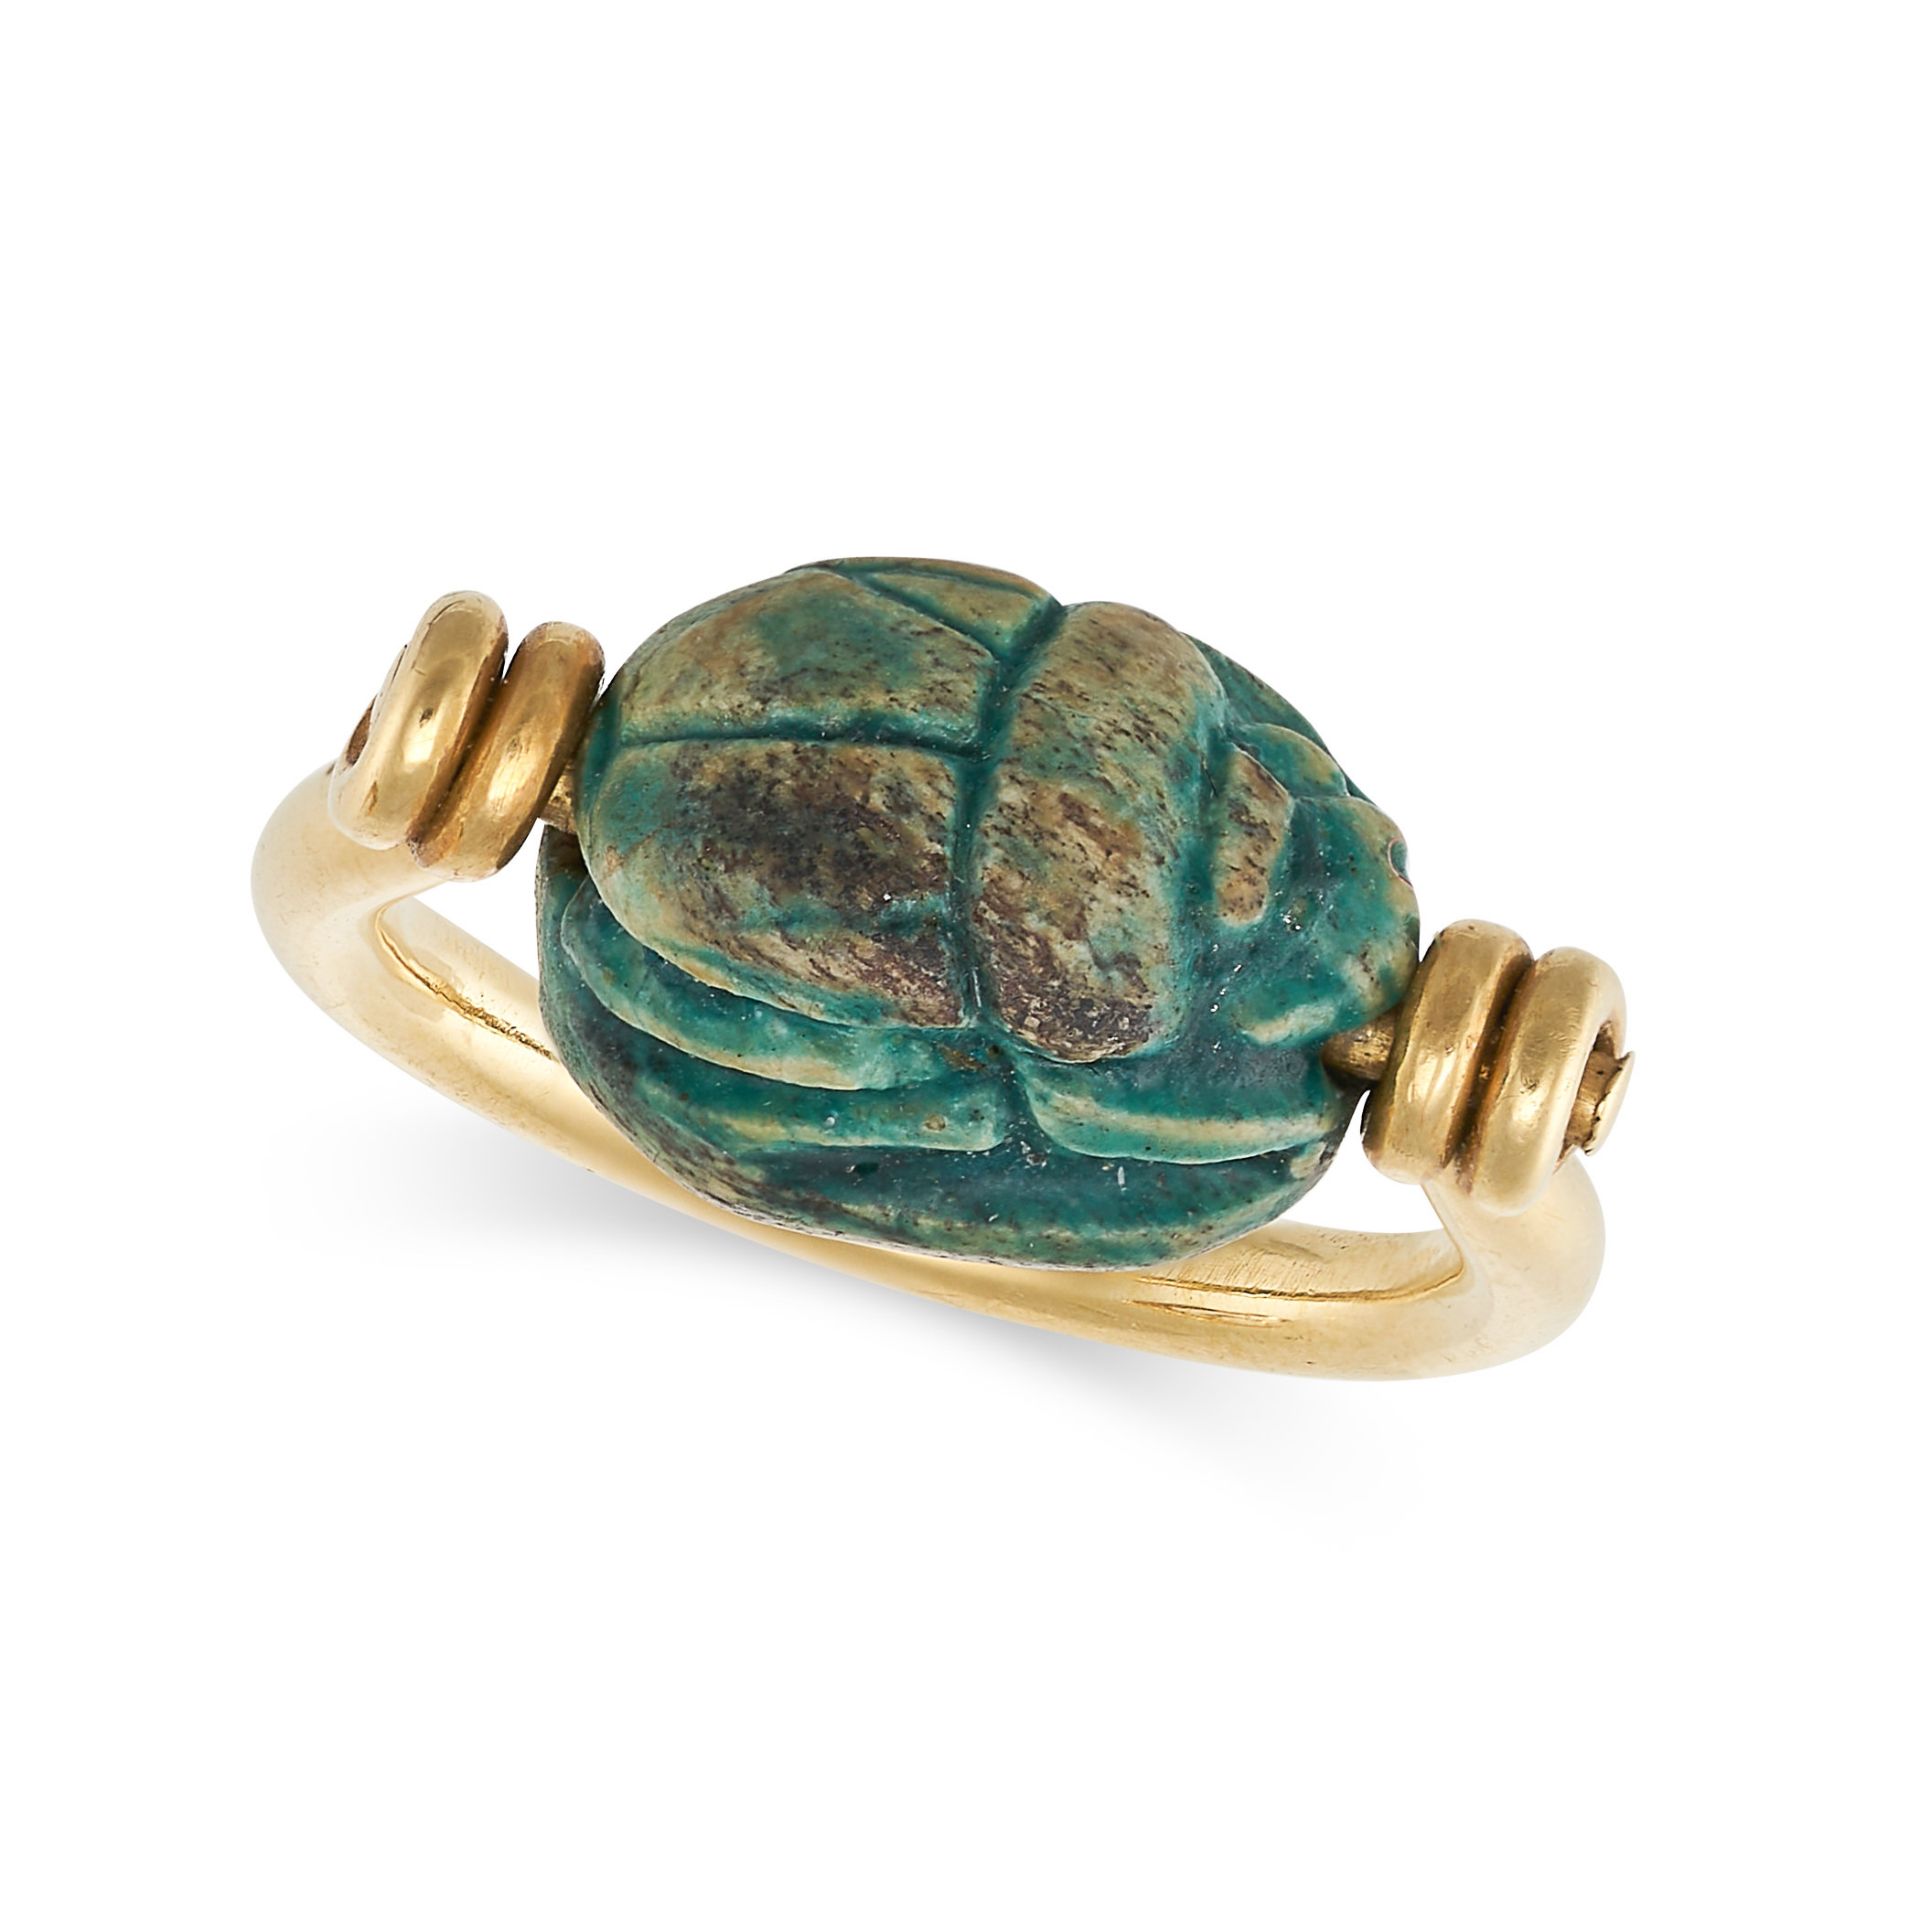 AN EGYPTIAN REVIVAL SCARAB BEETLE RING in 18ct yellow gold, set with a carved blue hardstone scar...